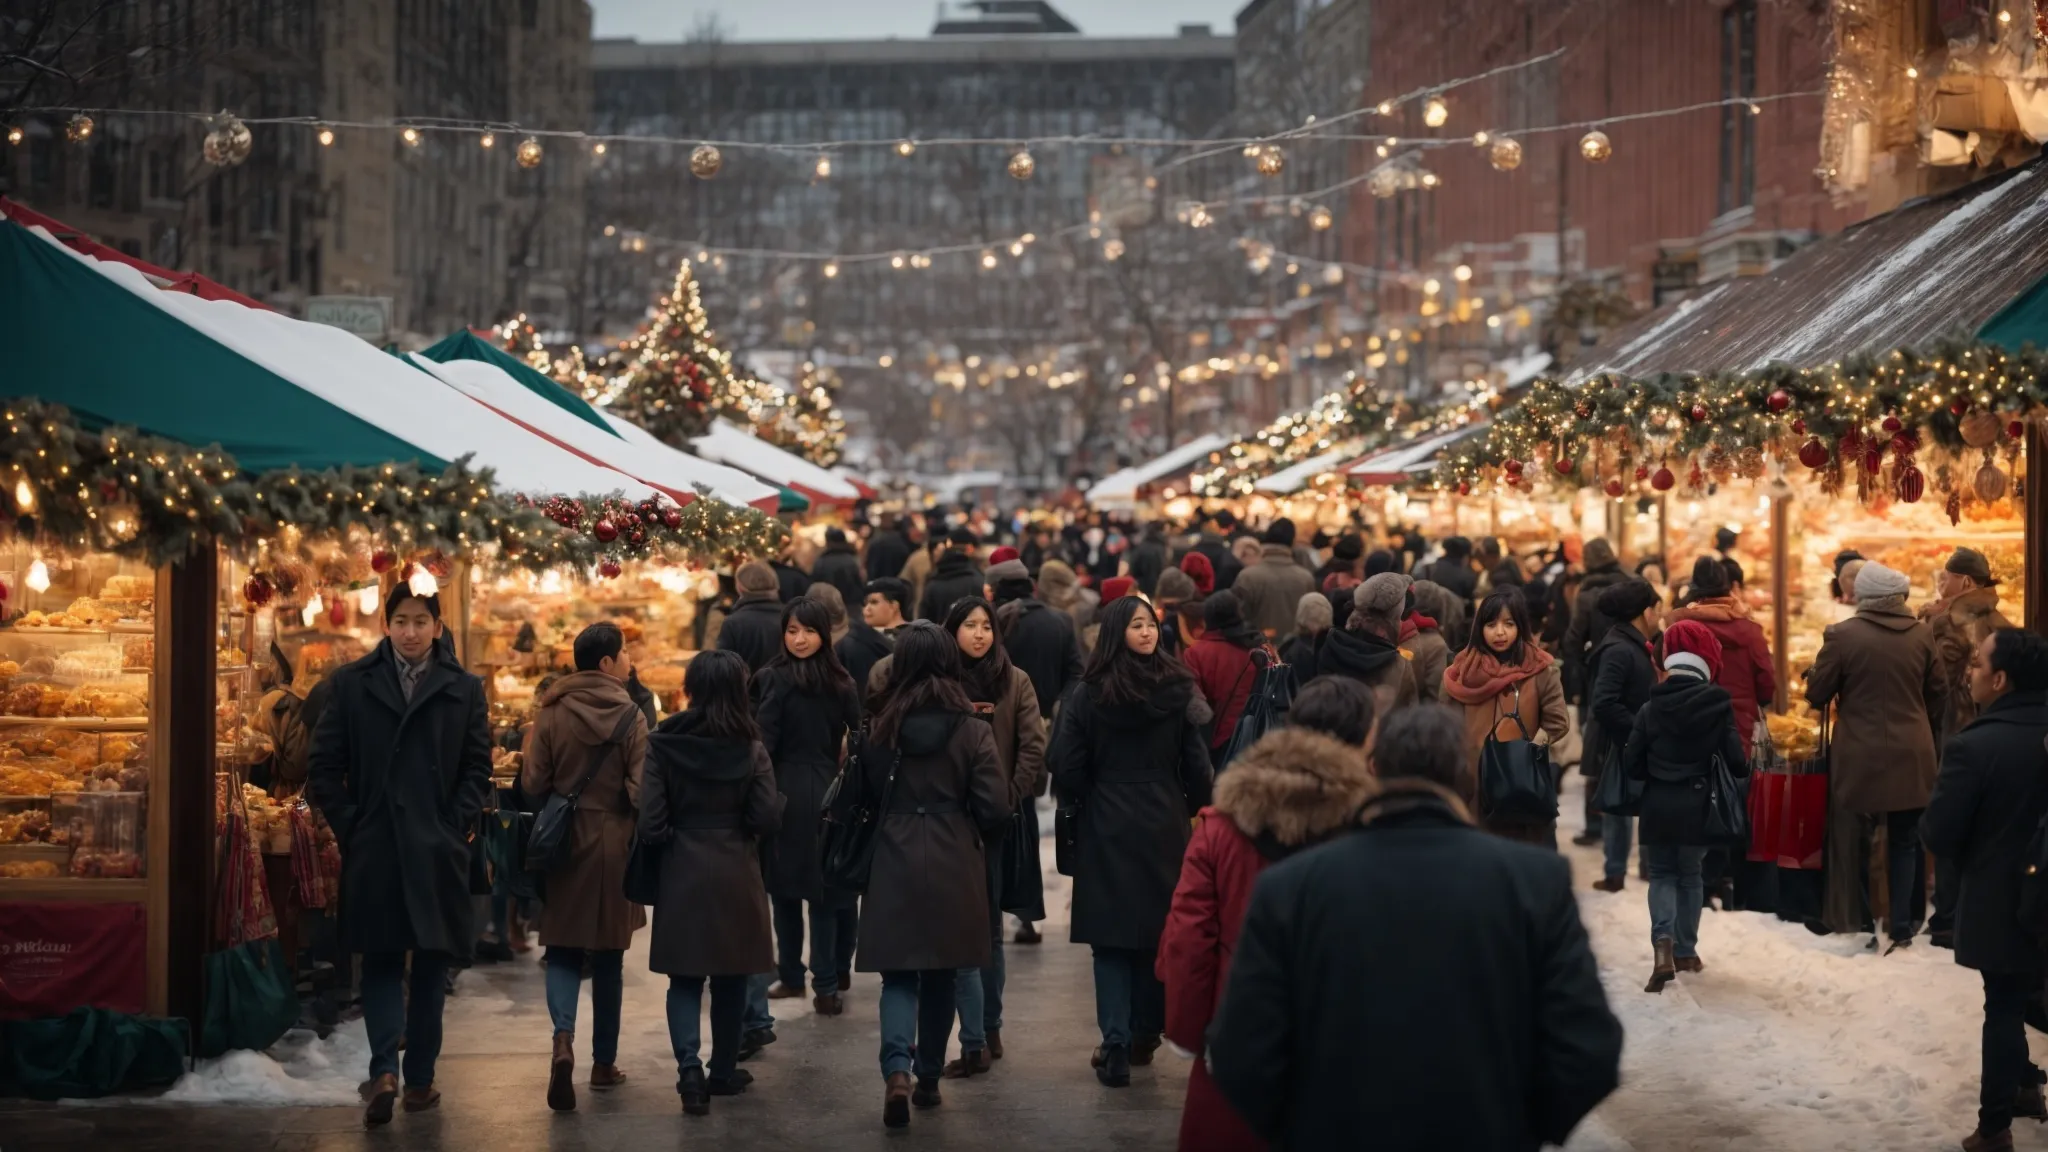 a bustling holiday market scene with shoppers interacting with festive storefronts.